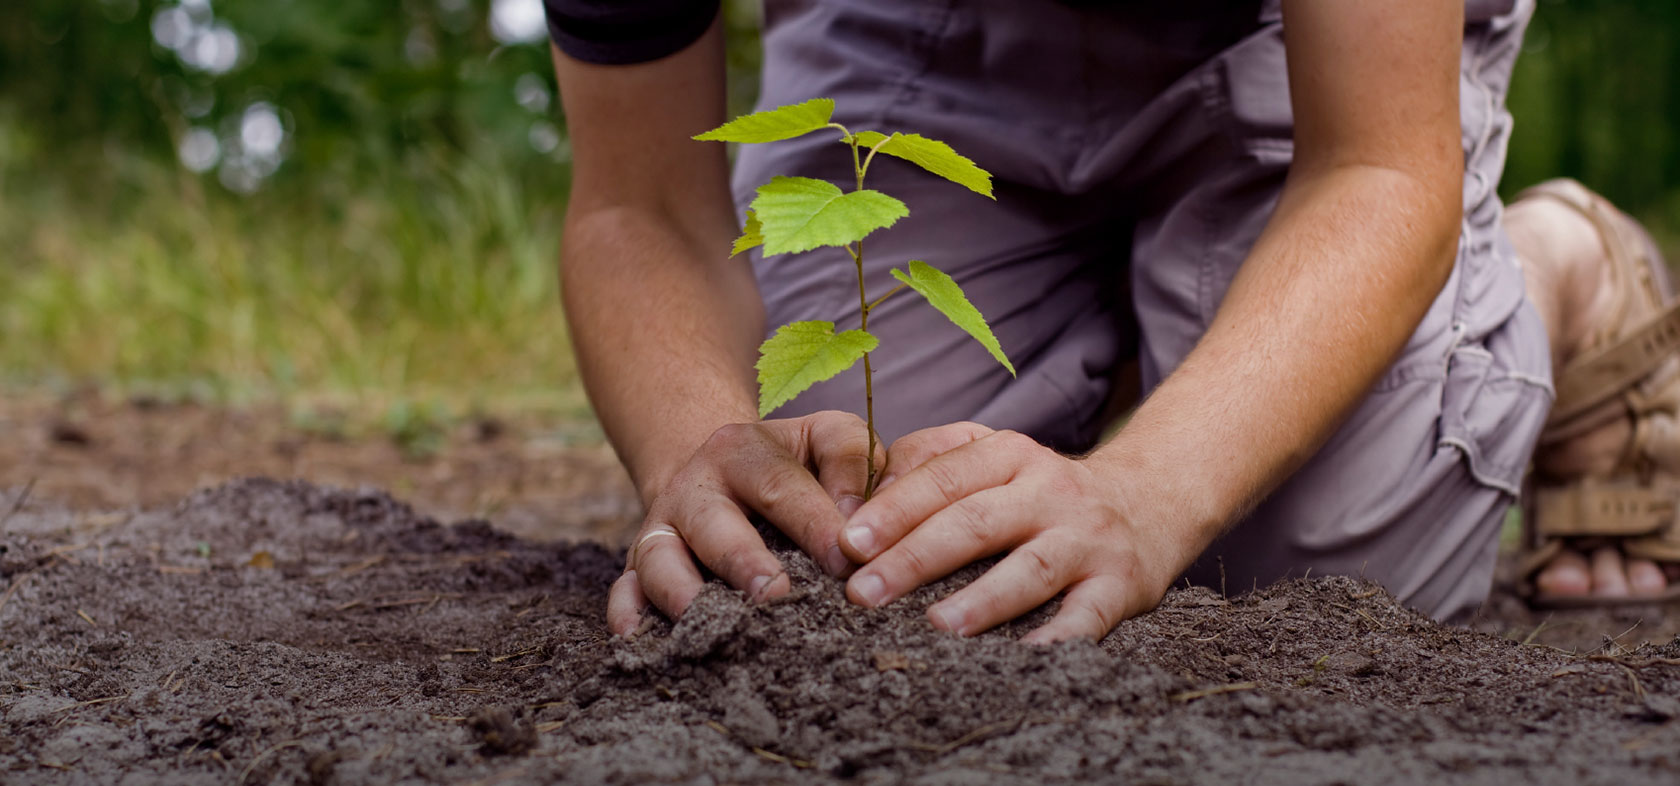 A person planting a tree